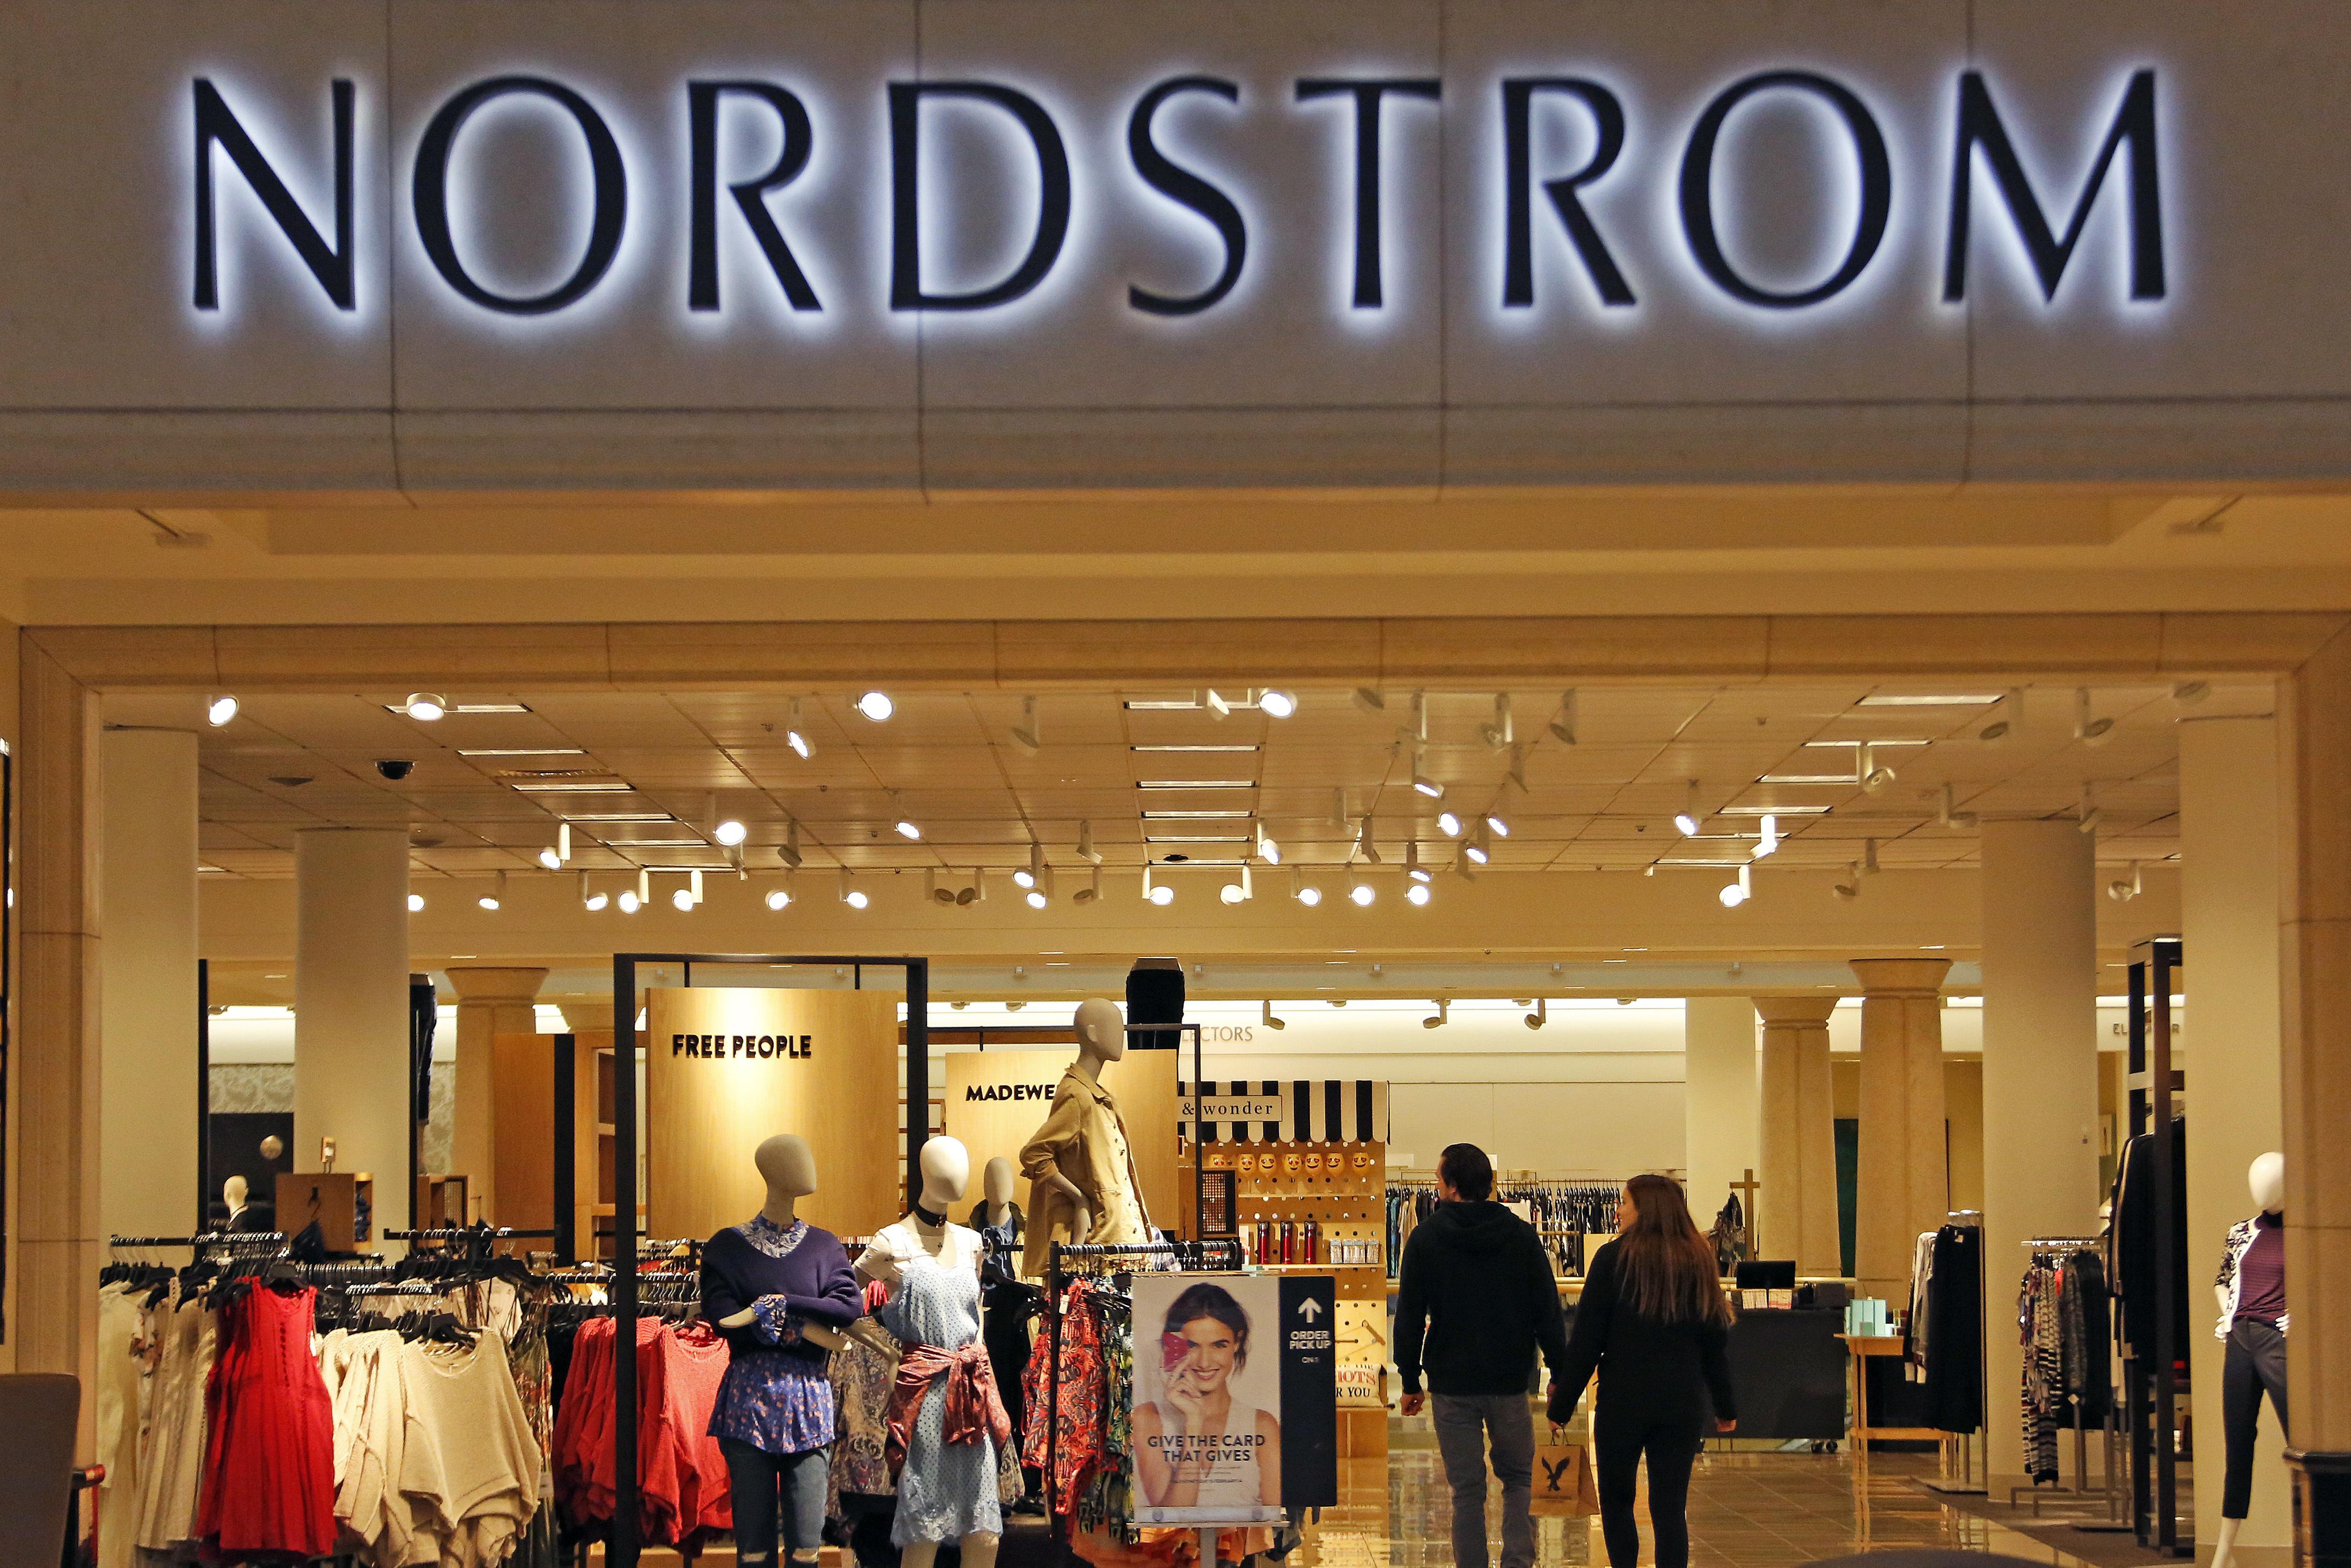 Nordstrom cuts 6,000 jobs, reduces workforce nationwide 